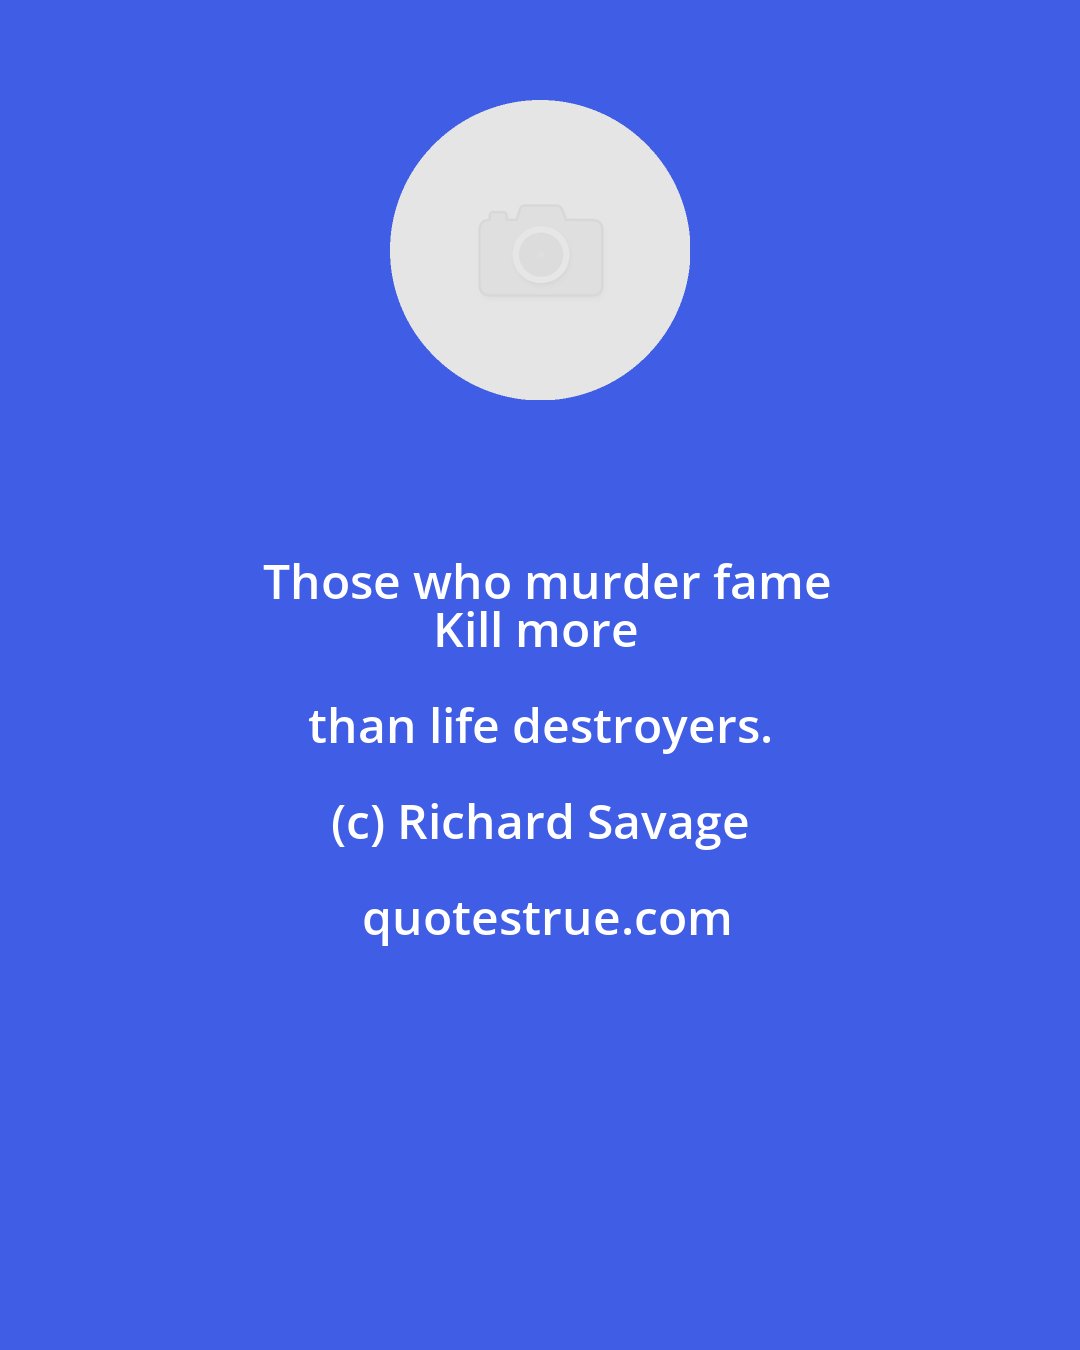 Richard Savage: Those who murder fame
Kill more than life destroyers.